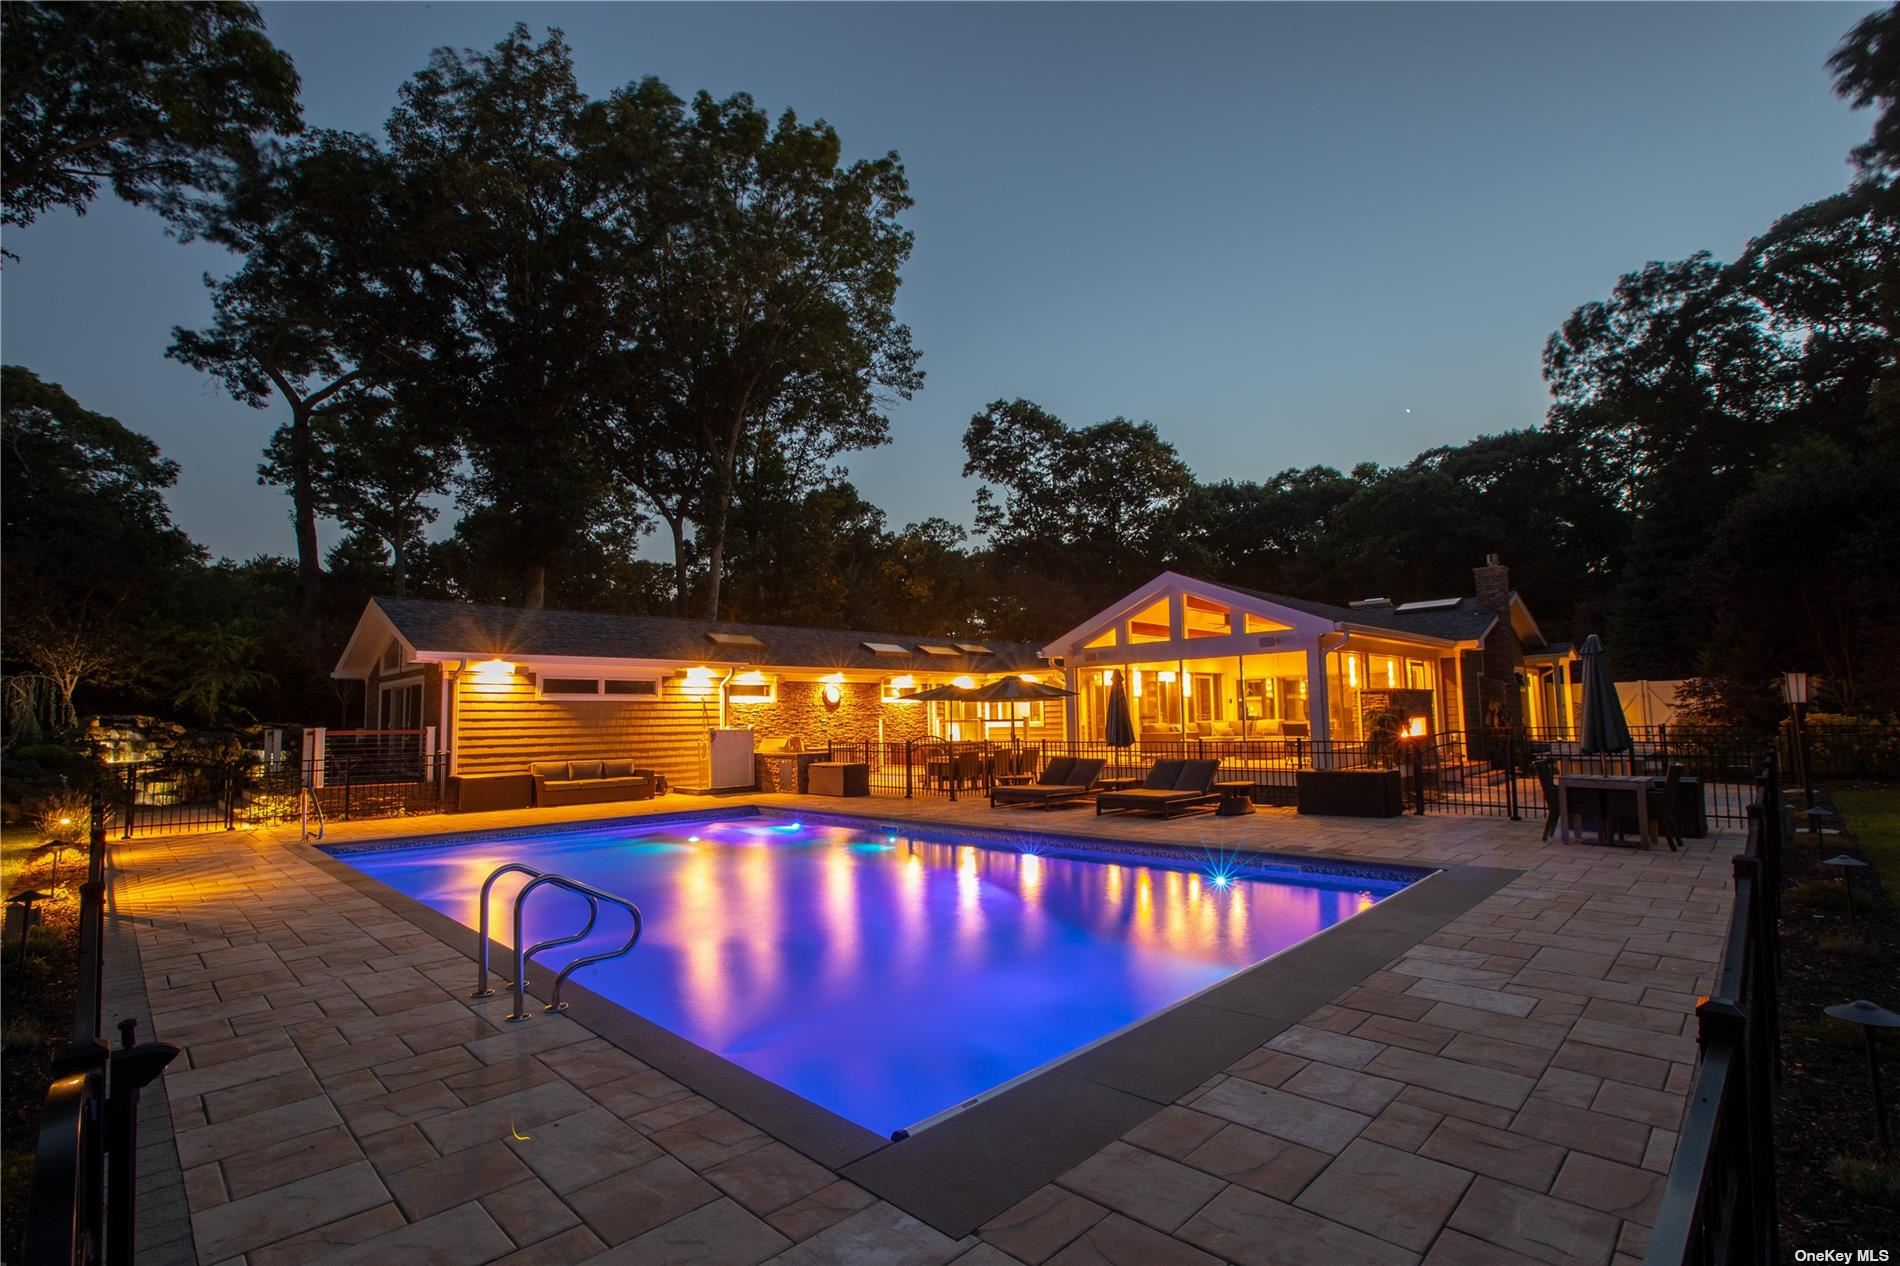 Property for Sale at 49 Branch Brook Drive, Smithtown, Hamptons, NY - Bedrooms: 4 
Bathrooms: 4  - $1,950,000